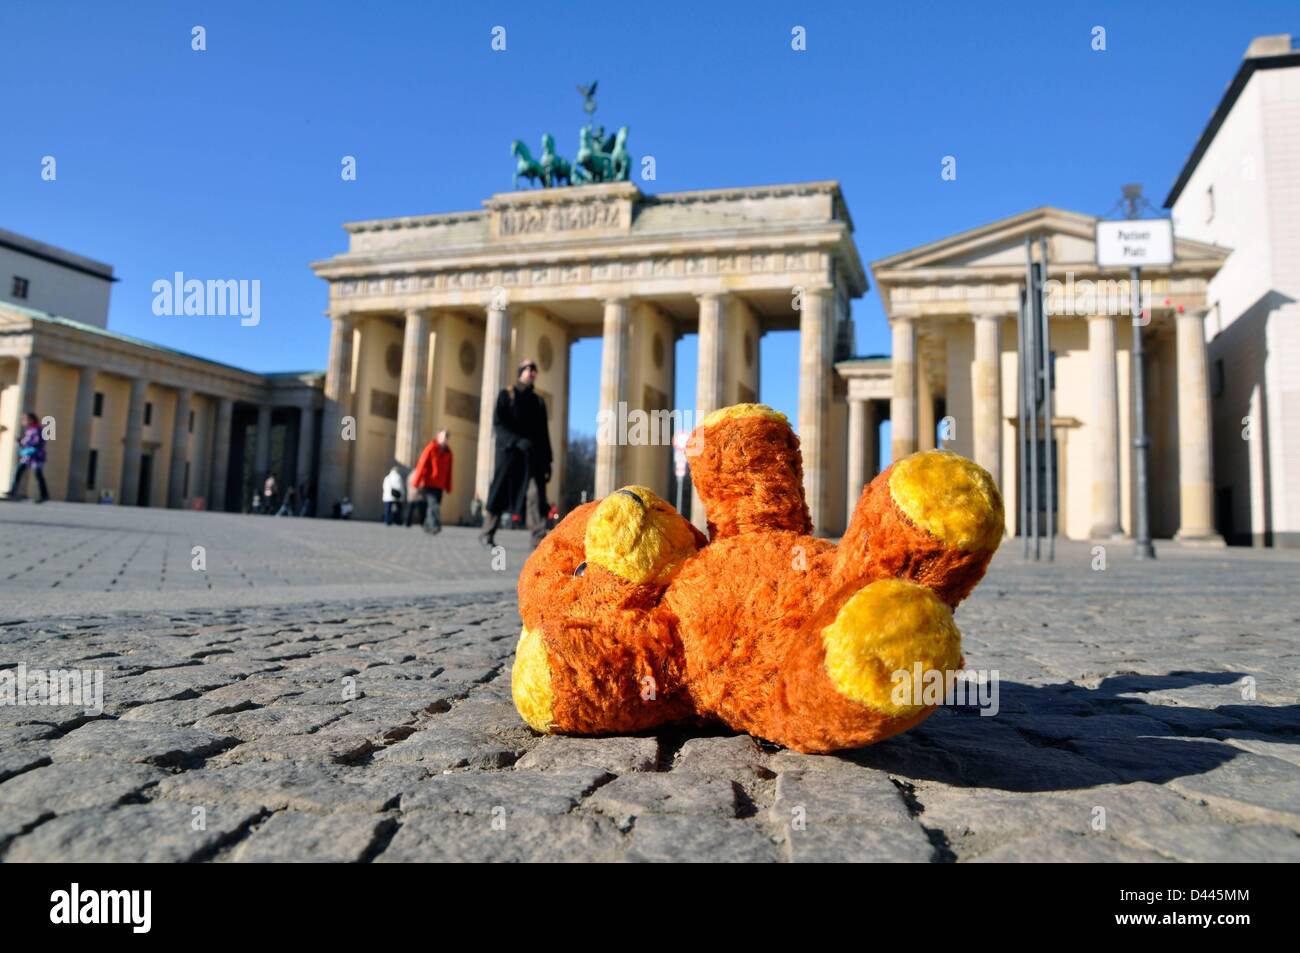 Illustration - A teddy bear is pictured lying on the ground in front of the Brandenburg Gate in Berlin, Germany, 6 March 2011. Fotoarchiv für ZeitgeschichteS.Steinach Stock Photo